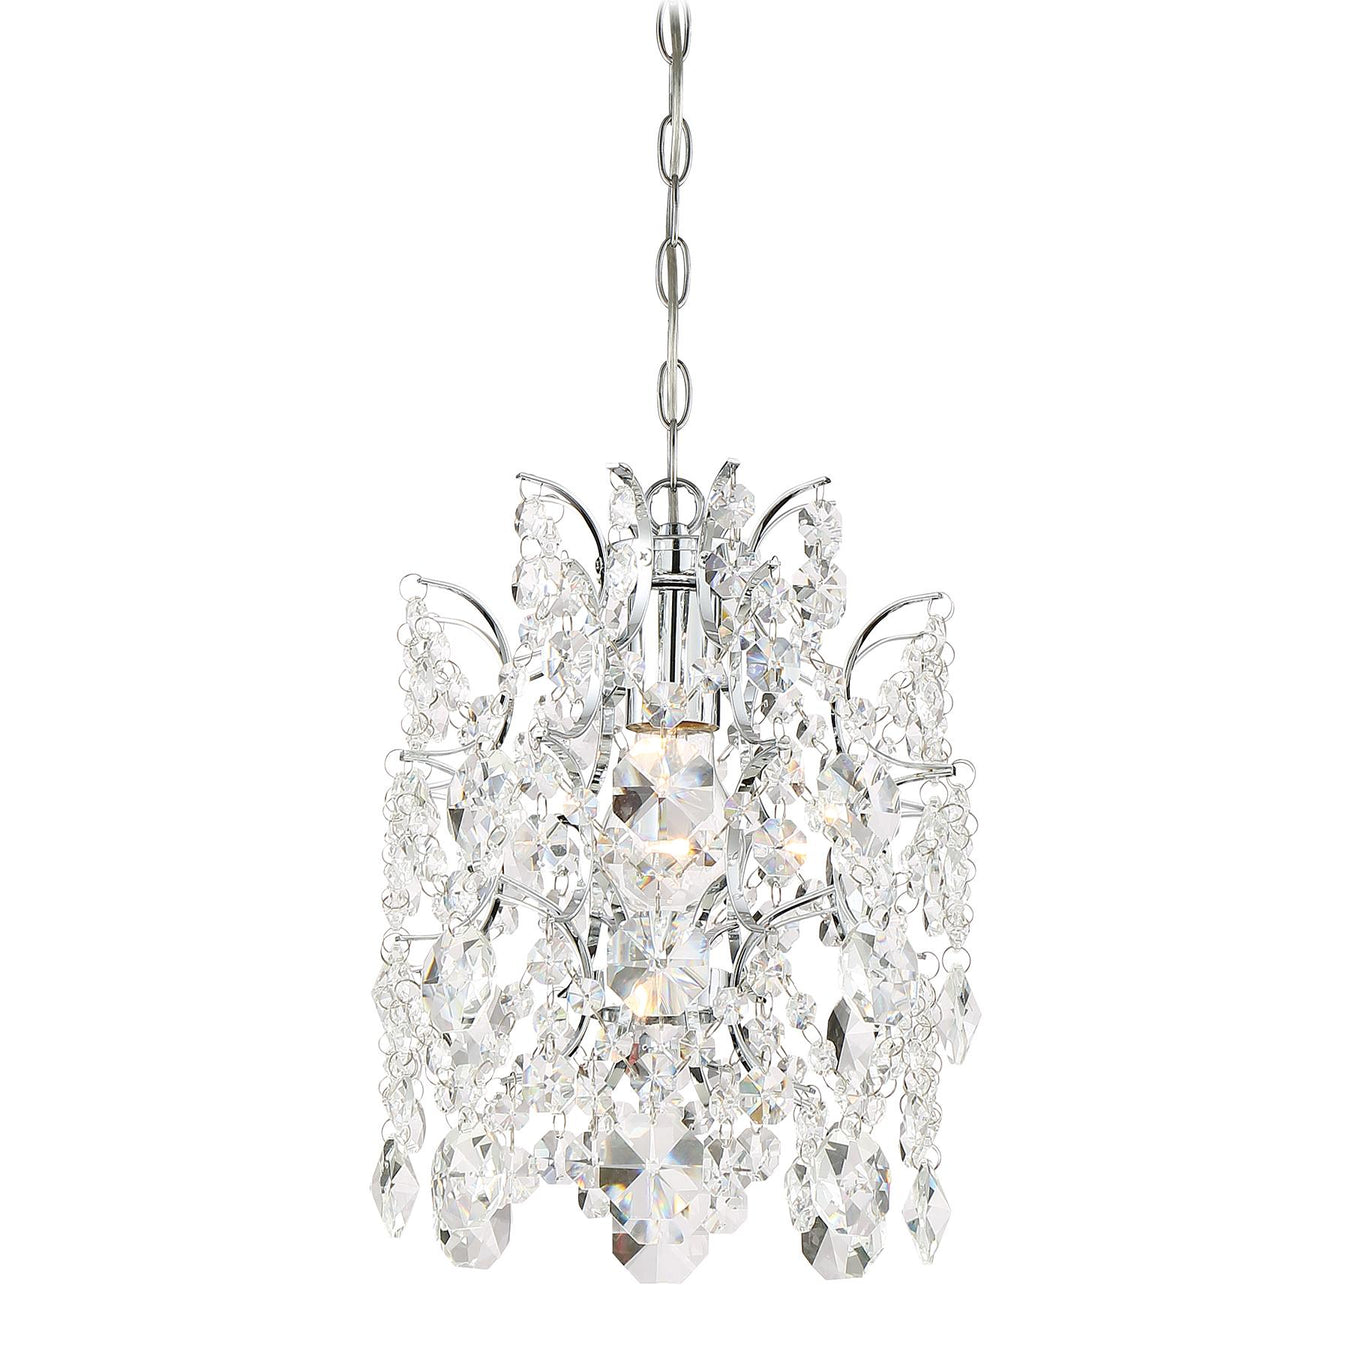 Isabella's Crown 1-Light Mini-Pendant in Chrome & Clear Crystal Strings Accents - Lamps Expo